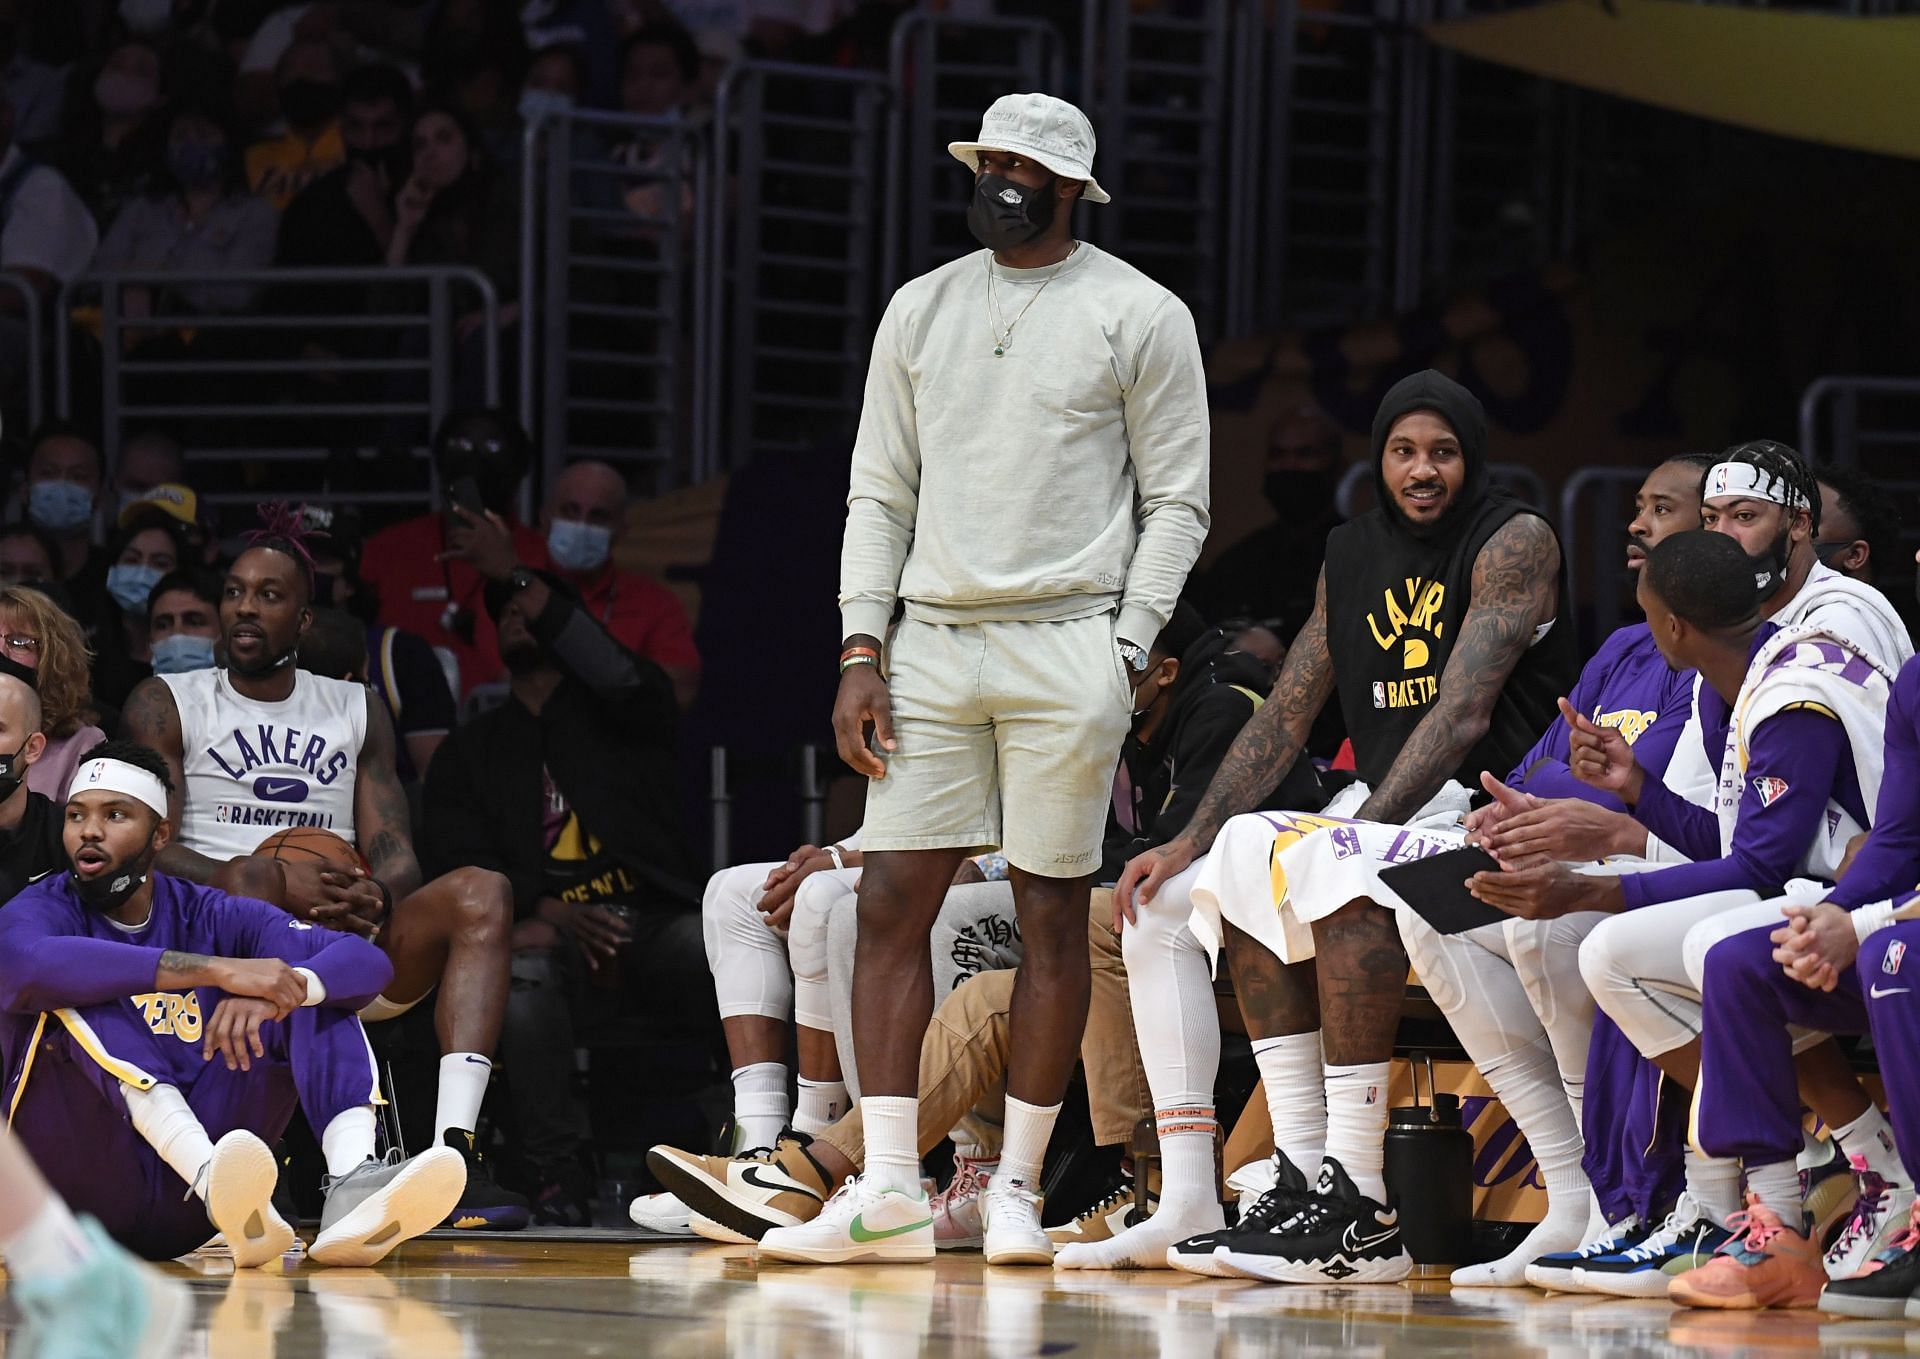 The LA Lakers did not win any of their preseason games.